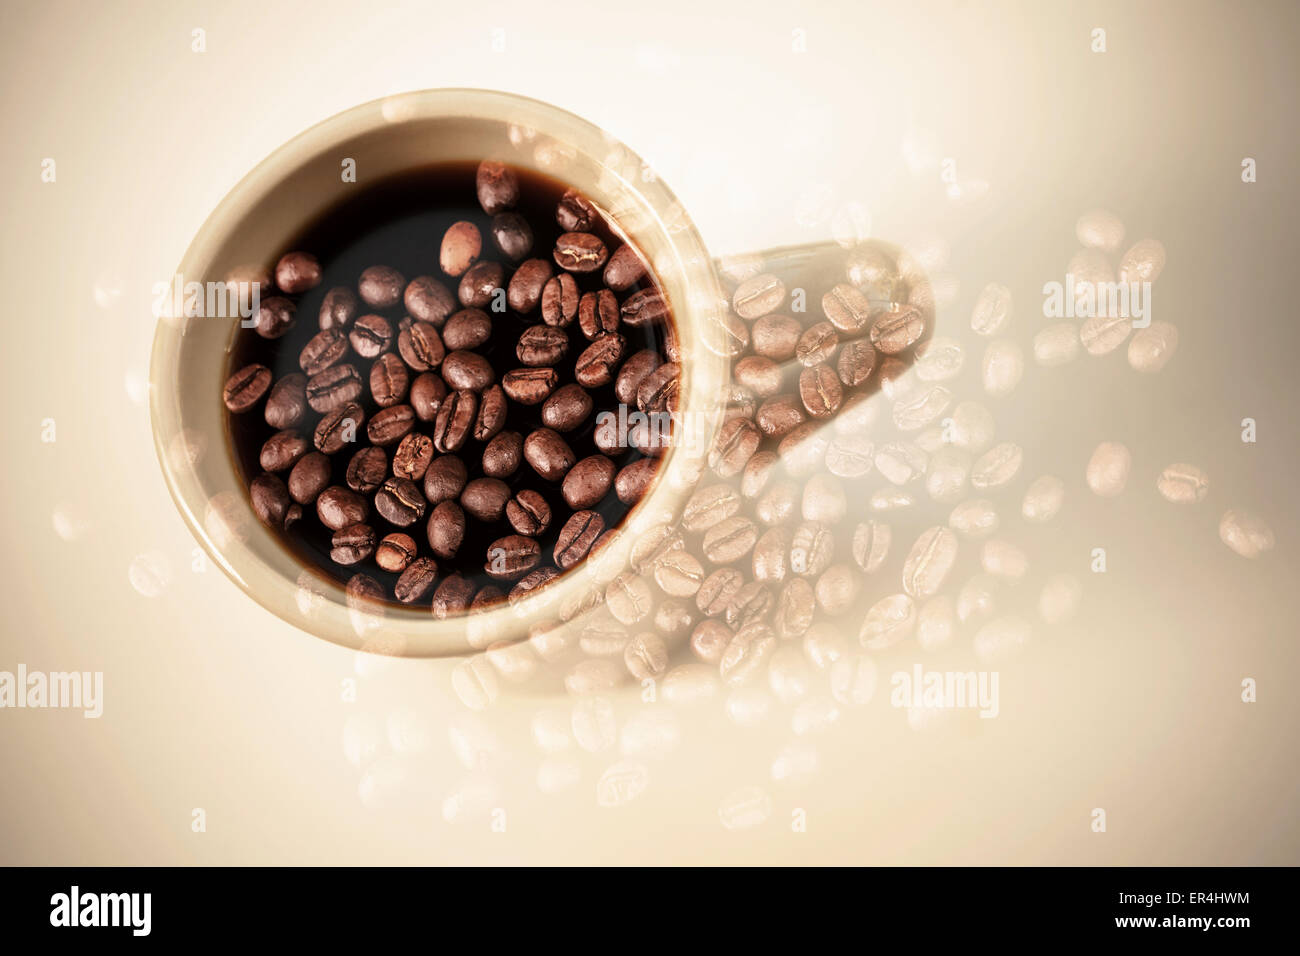 White coffee cup stand on a table over dark rusted coffee beans texture. Double exposure photo with vintage style photo filter e Stock Photo